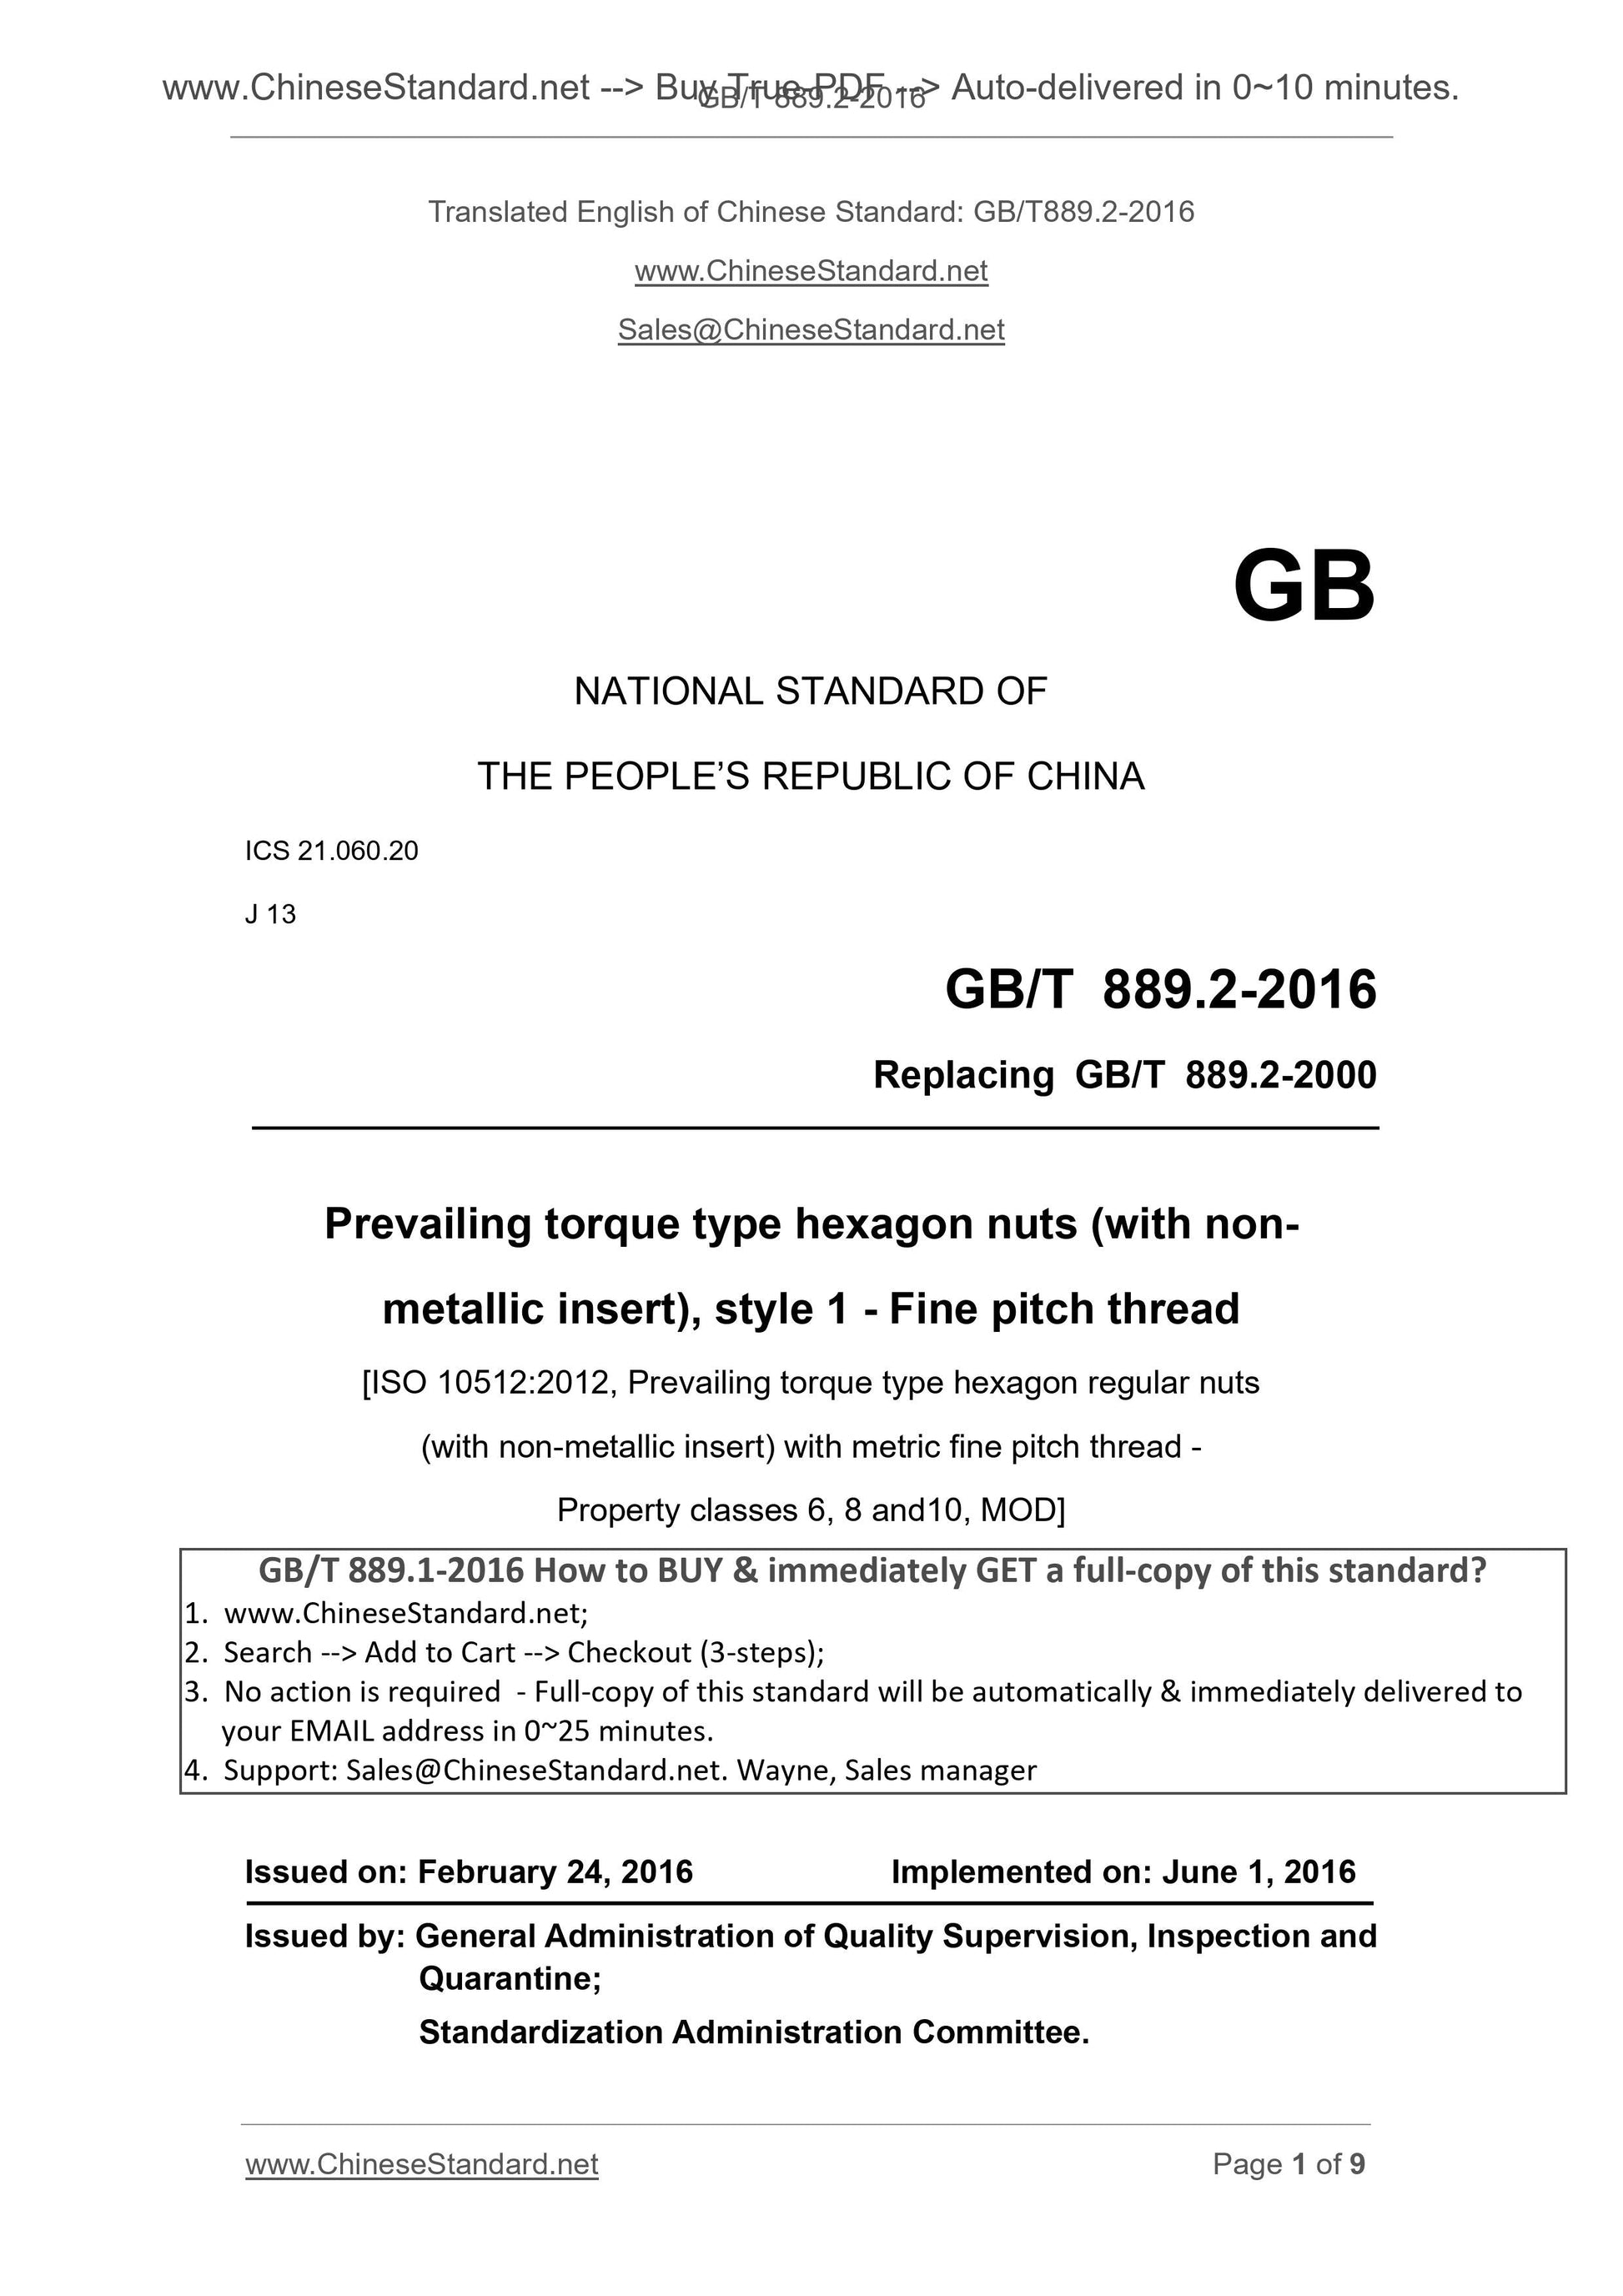 GB/T 889.2-2016 Page 1